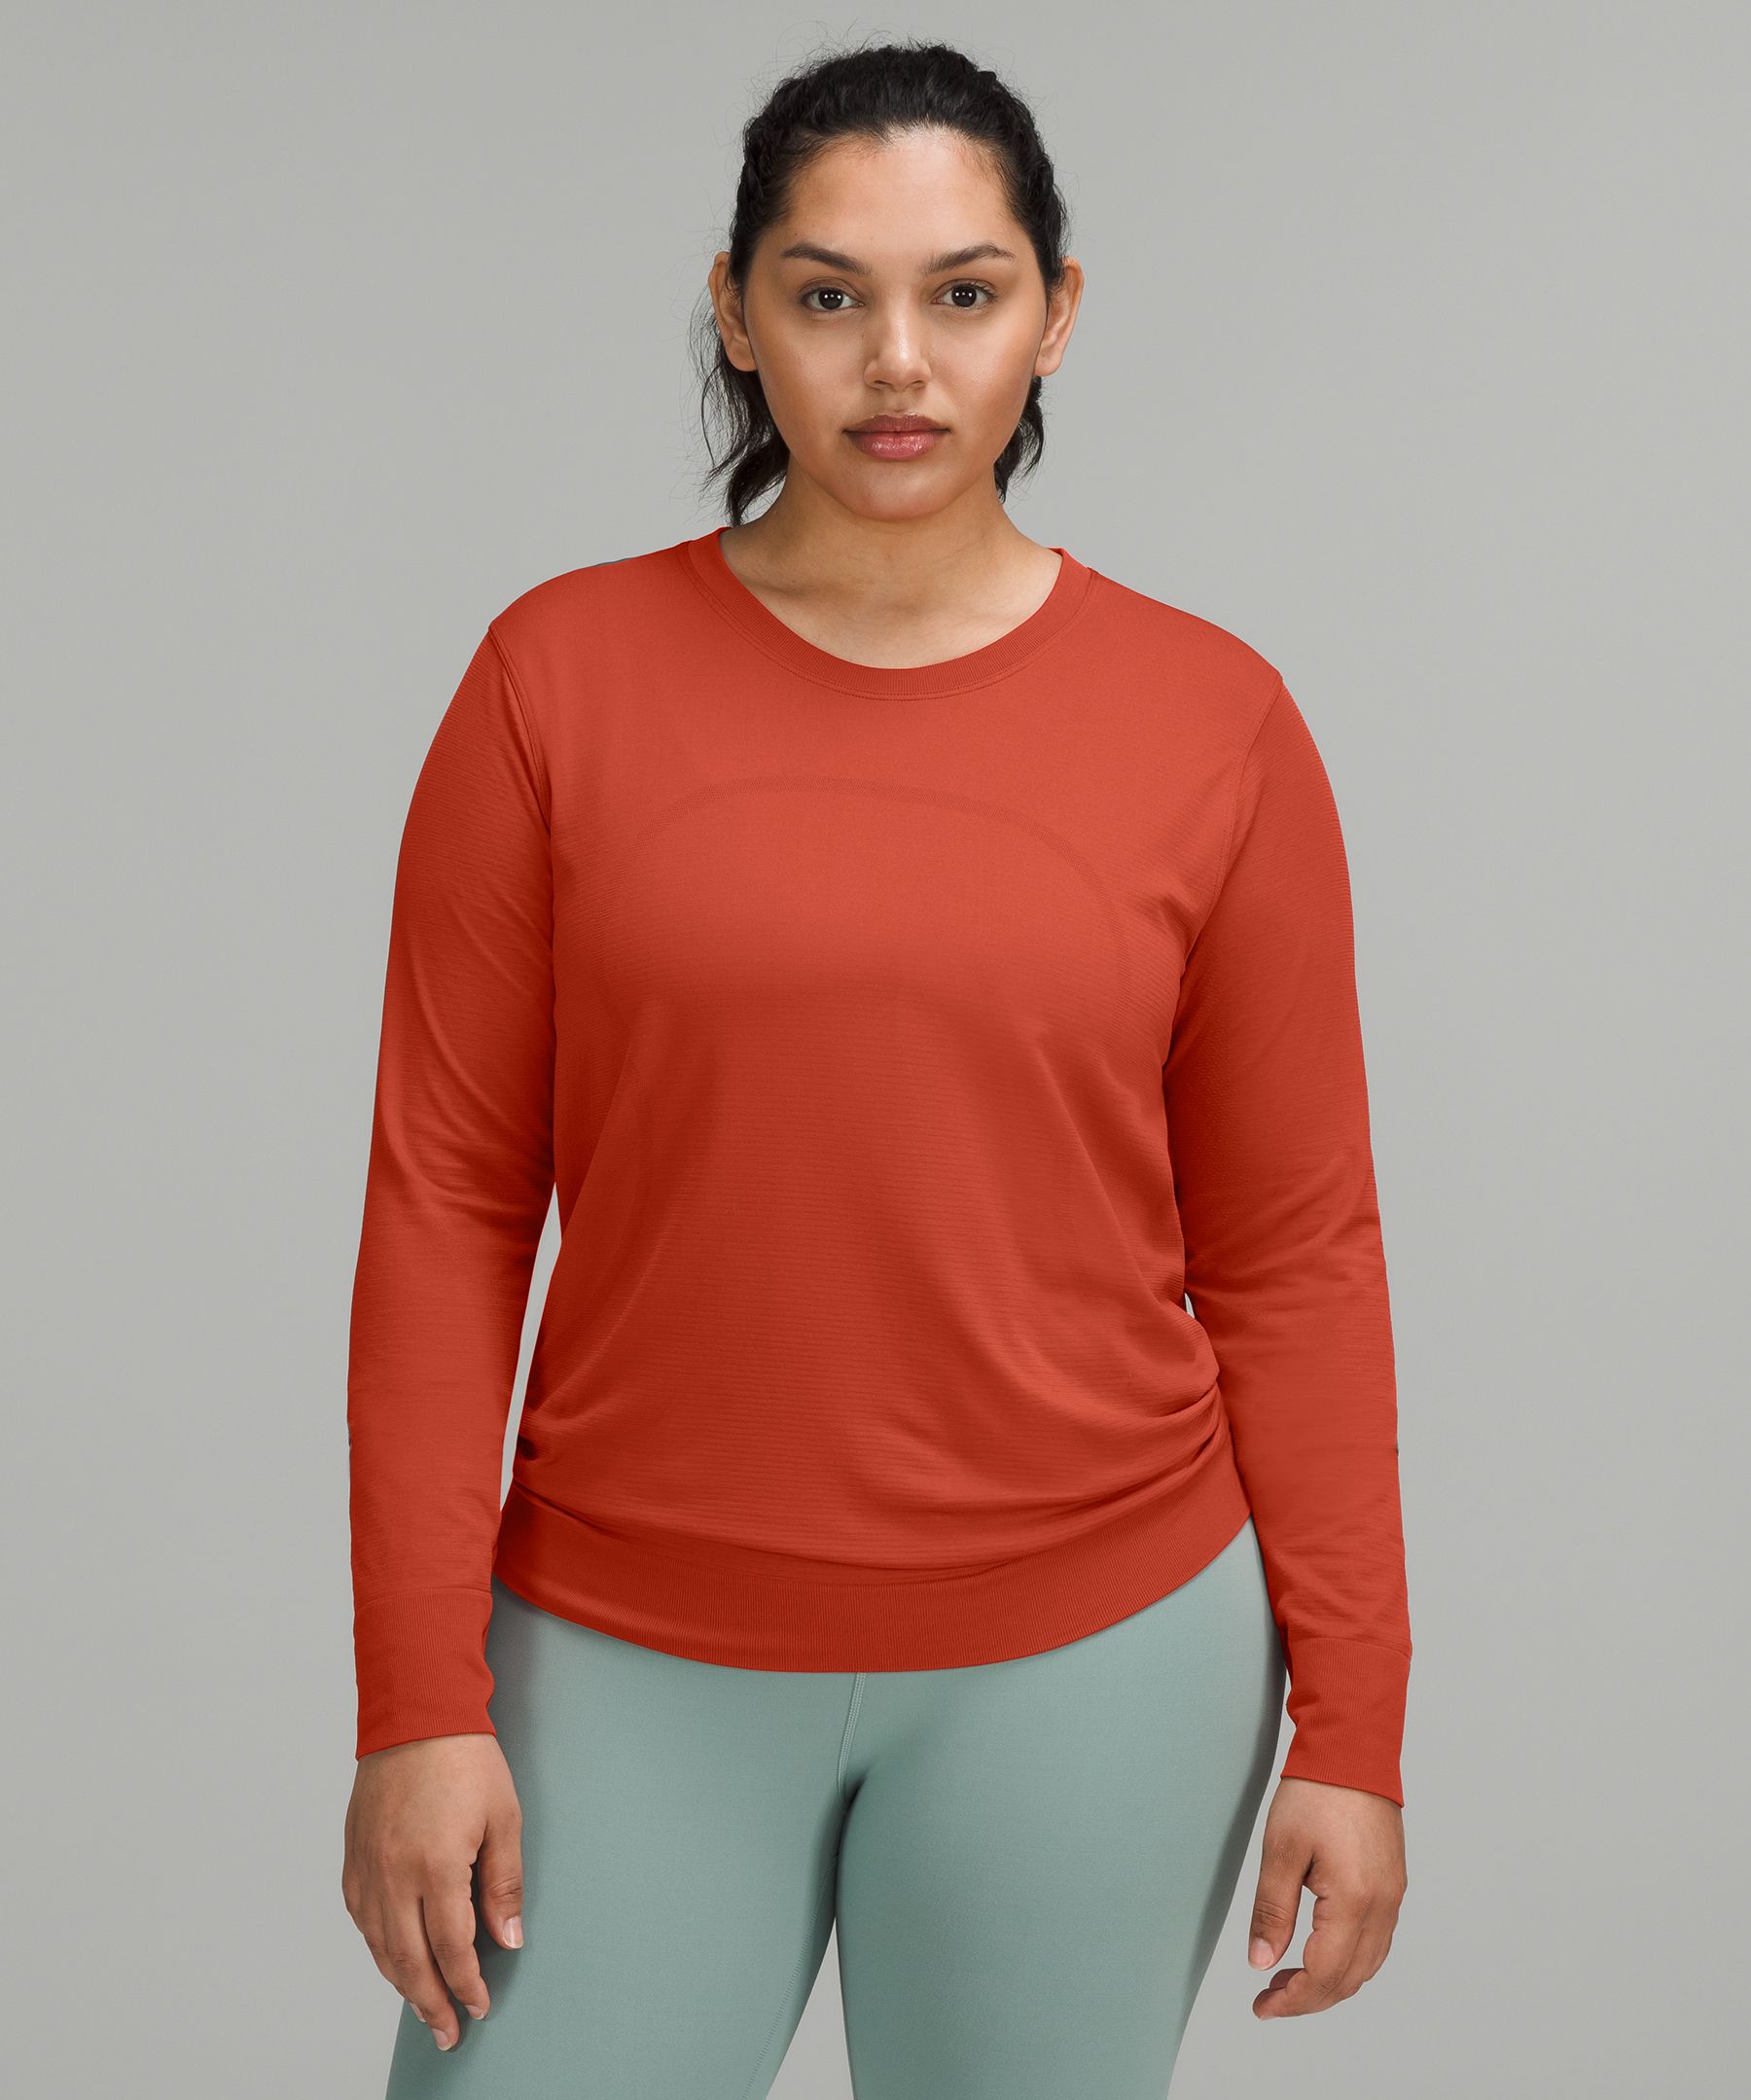 Lululemon Swiftly Relaxed-fit Long Sleeve Shirt In Red Rock/red Rock